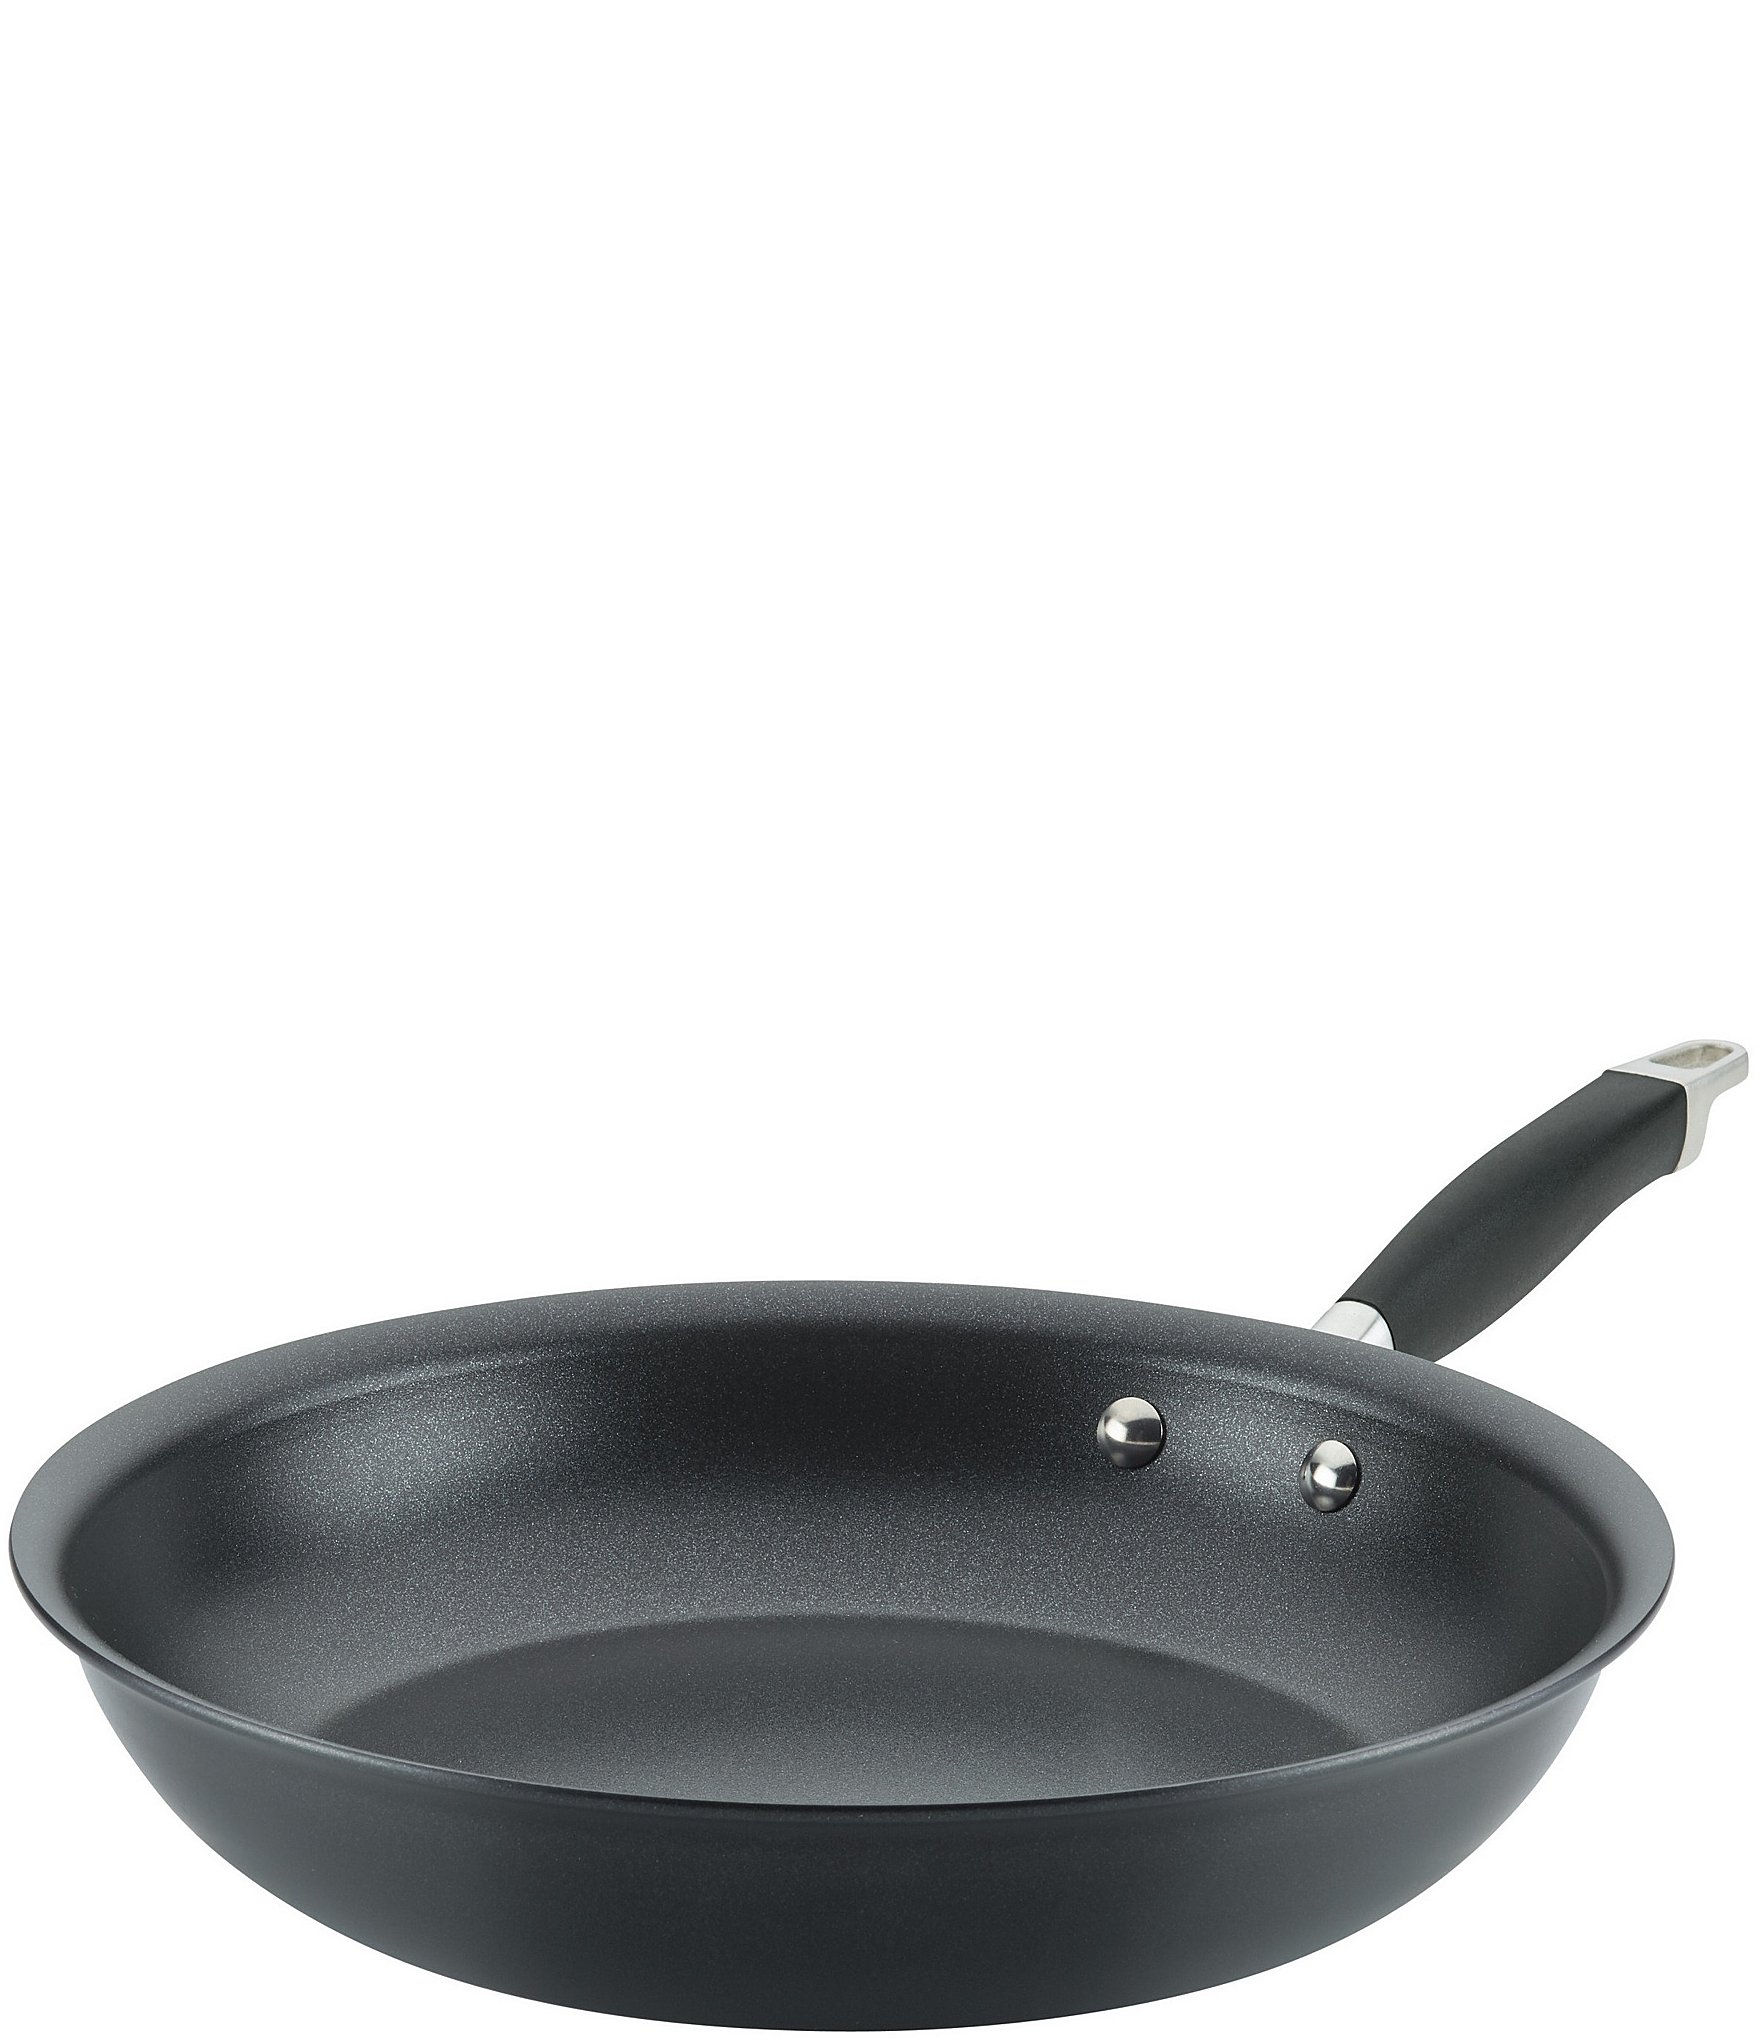  Anolon Advanced Hard Anodized Nonstick Frying / Fry